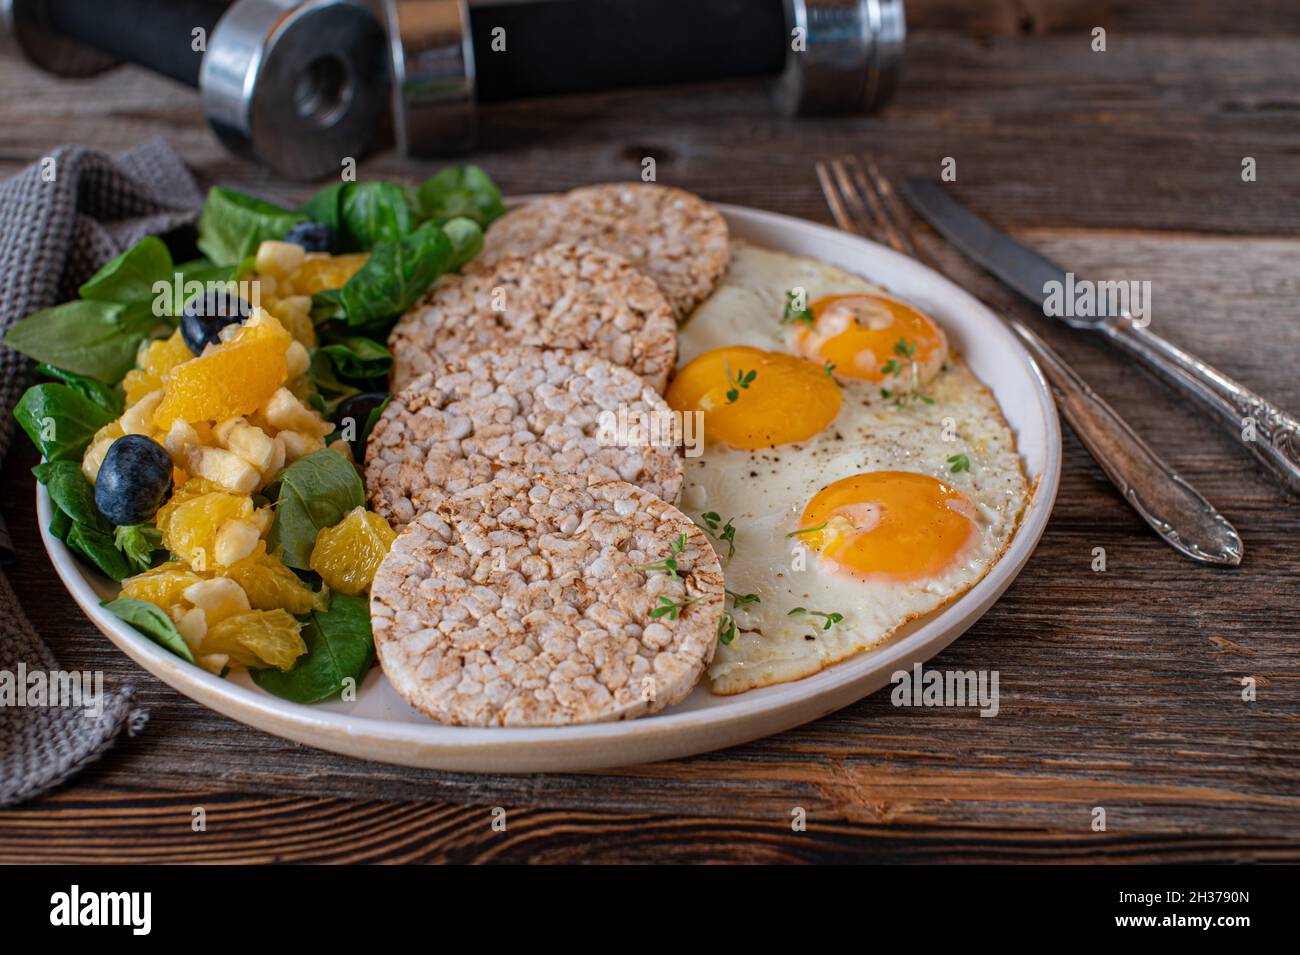 Plate with gluten free fitness breakfast Stock Photo